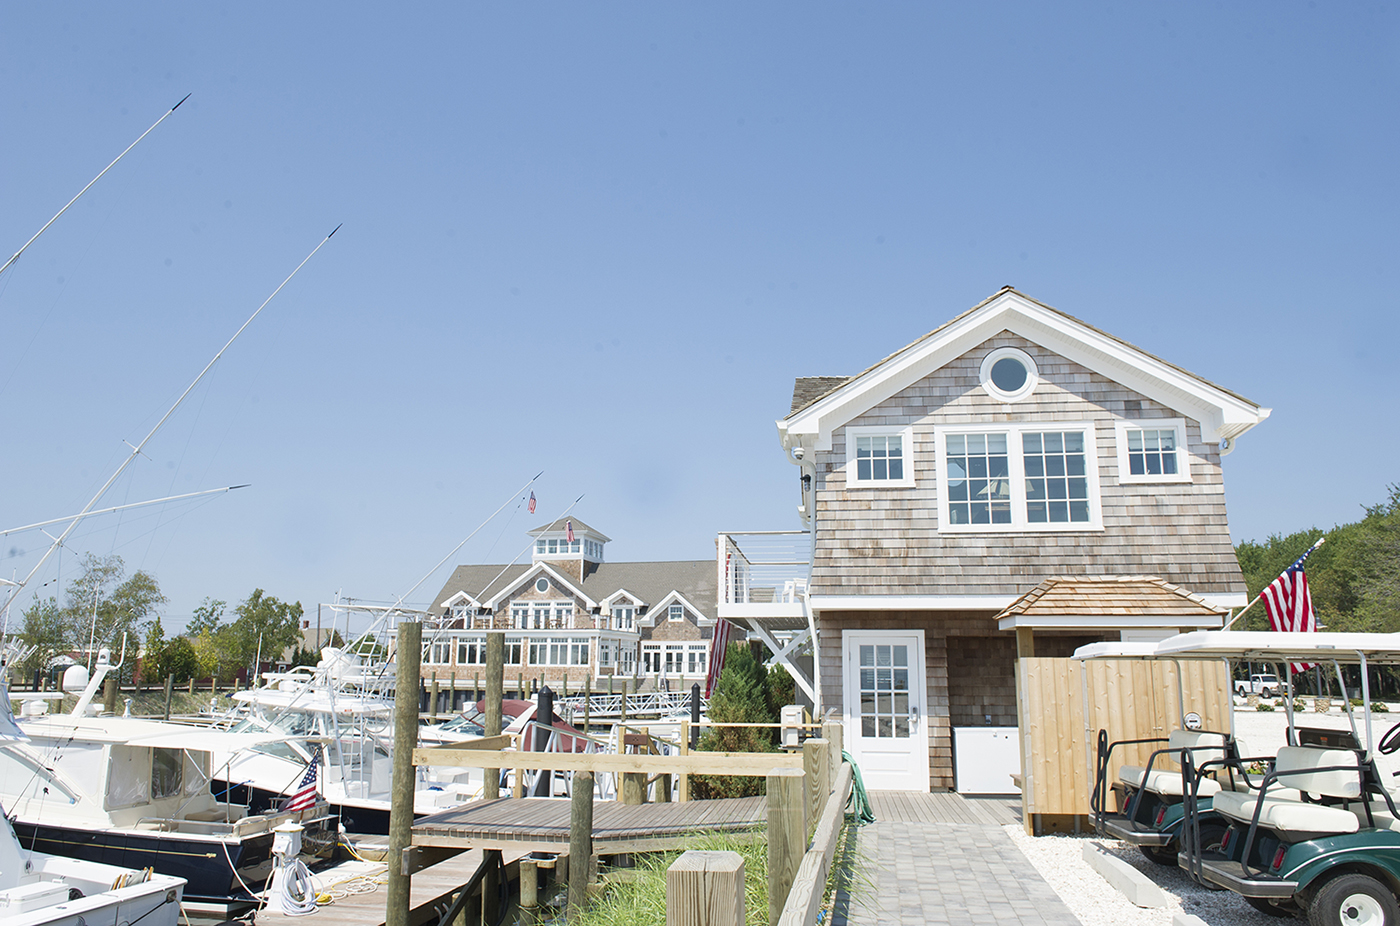 peconic bay yacht club about